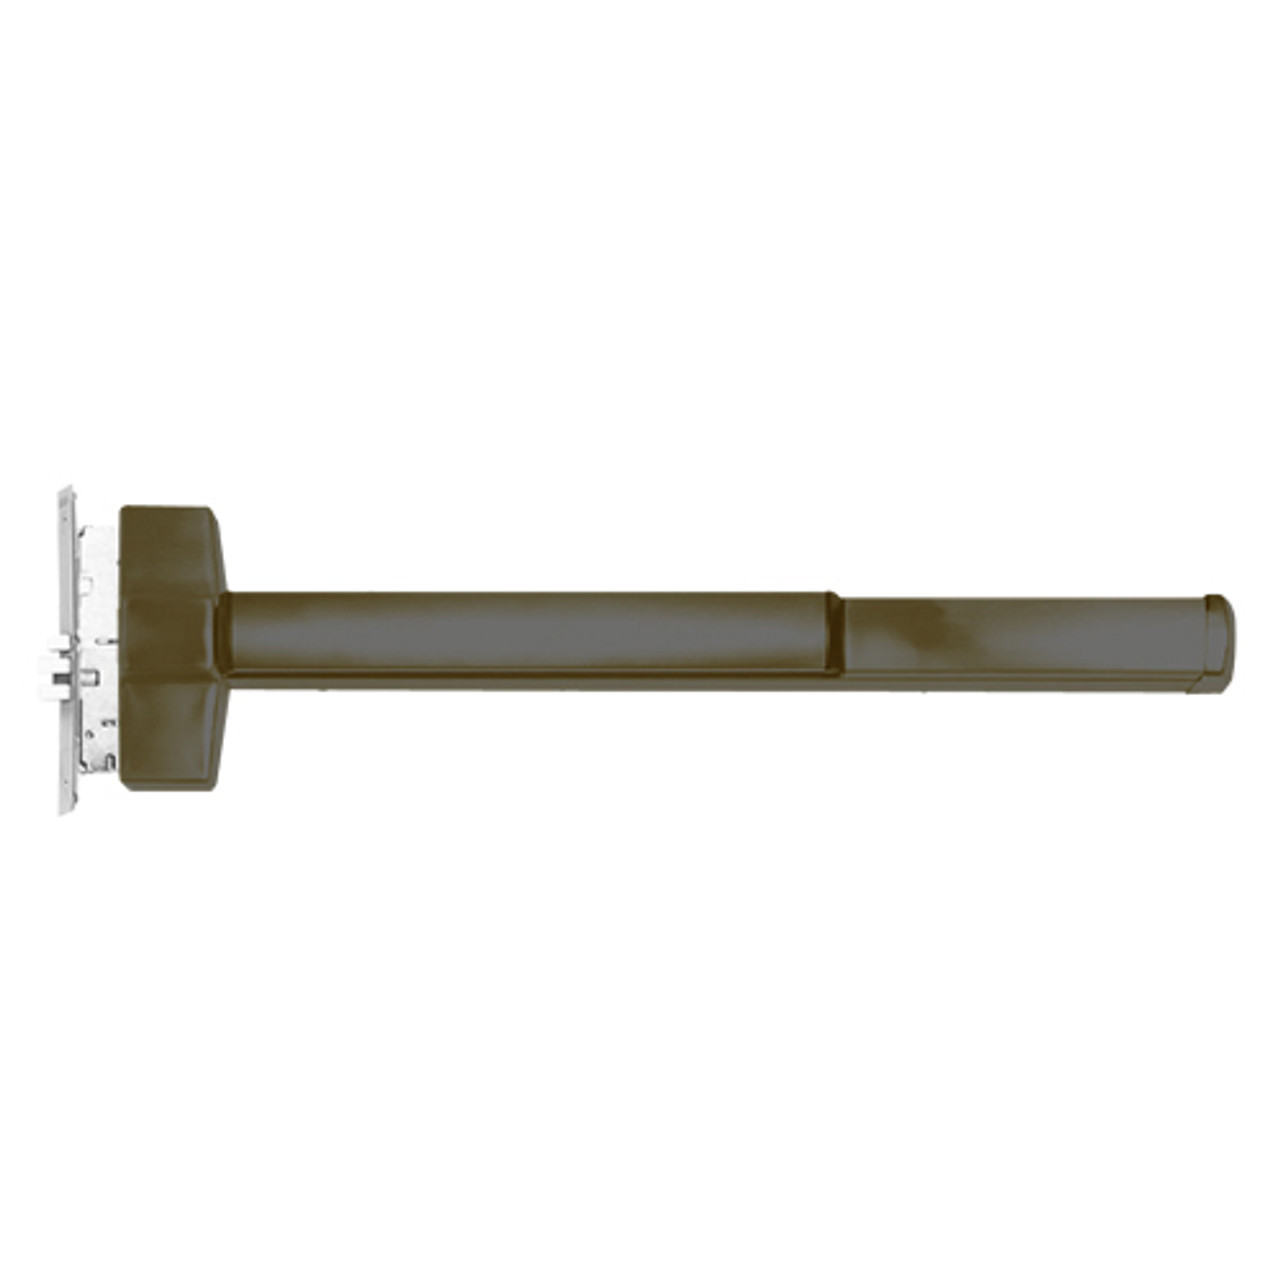 ED5657ATD-613-W048-LHR Corbin ED5600 Series Fire Rated Mortise Exit Device with Delayed Egress in Oil Rubbed Bronze Finish